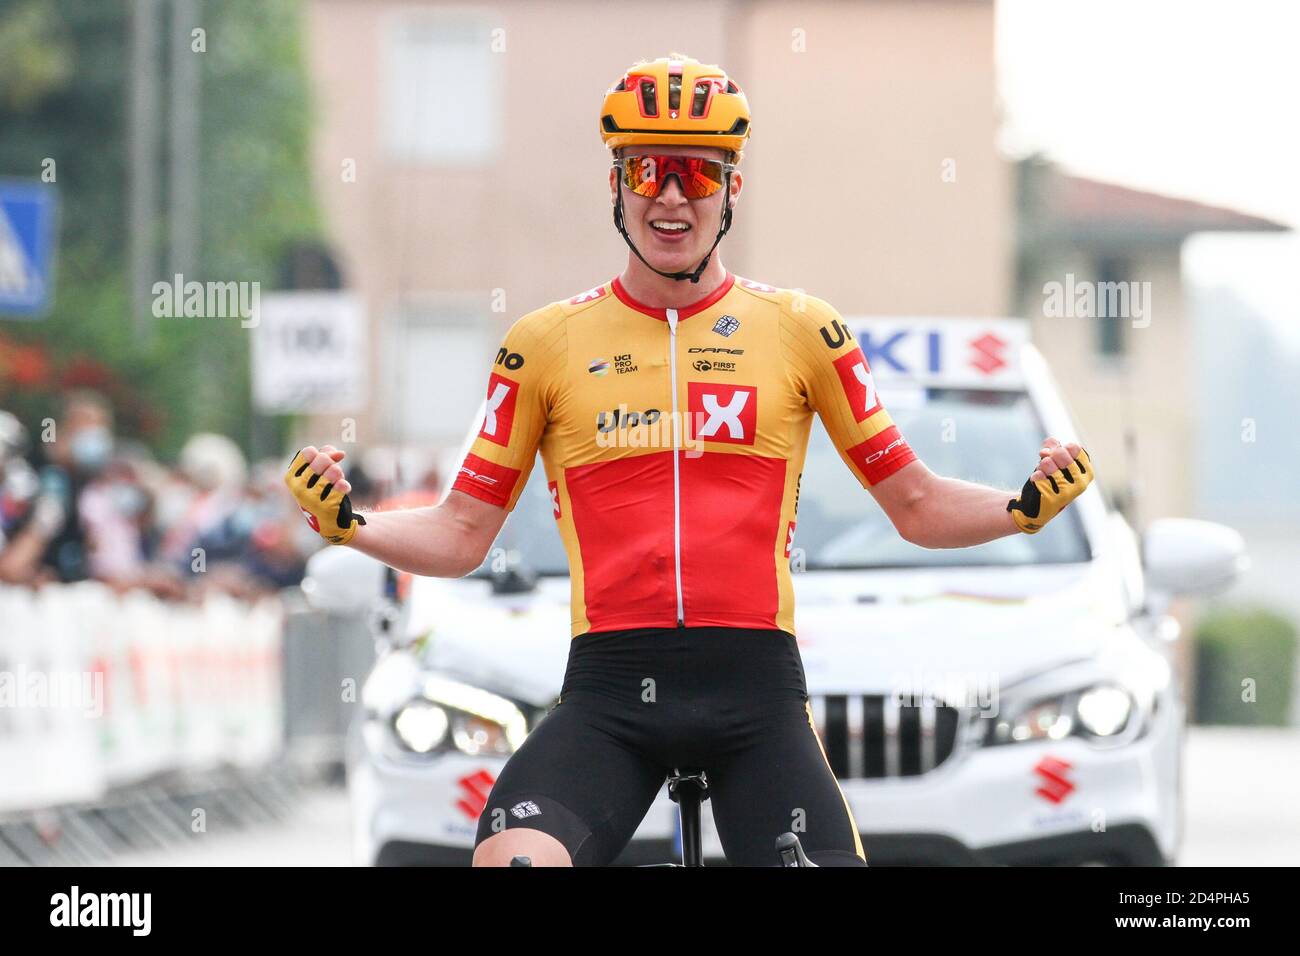 Buja, Italy. 10th Oct, 2020. buja, Italy, 10 Oct 2020, Andreas Leknessund - Uno XPro Cycling Team exulting in Buja for the leadership during Under 23 Elite - In line race - Road Race San Vito al Tagliamento - Buja - Street Cycling - Credit: LM/Luca Tedeschi Credit: Luca Tedeschi/LPS/ZUMA Wire/Alamy Live News Stock Photo